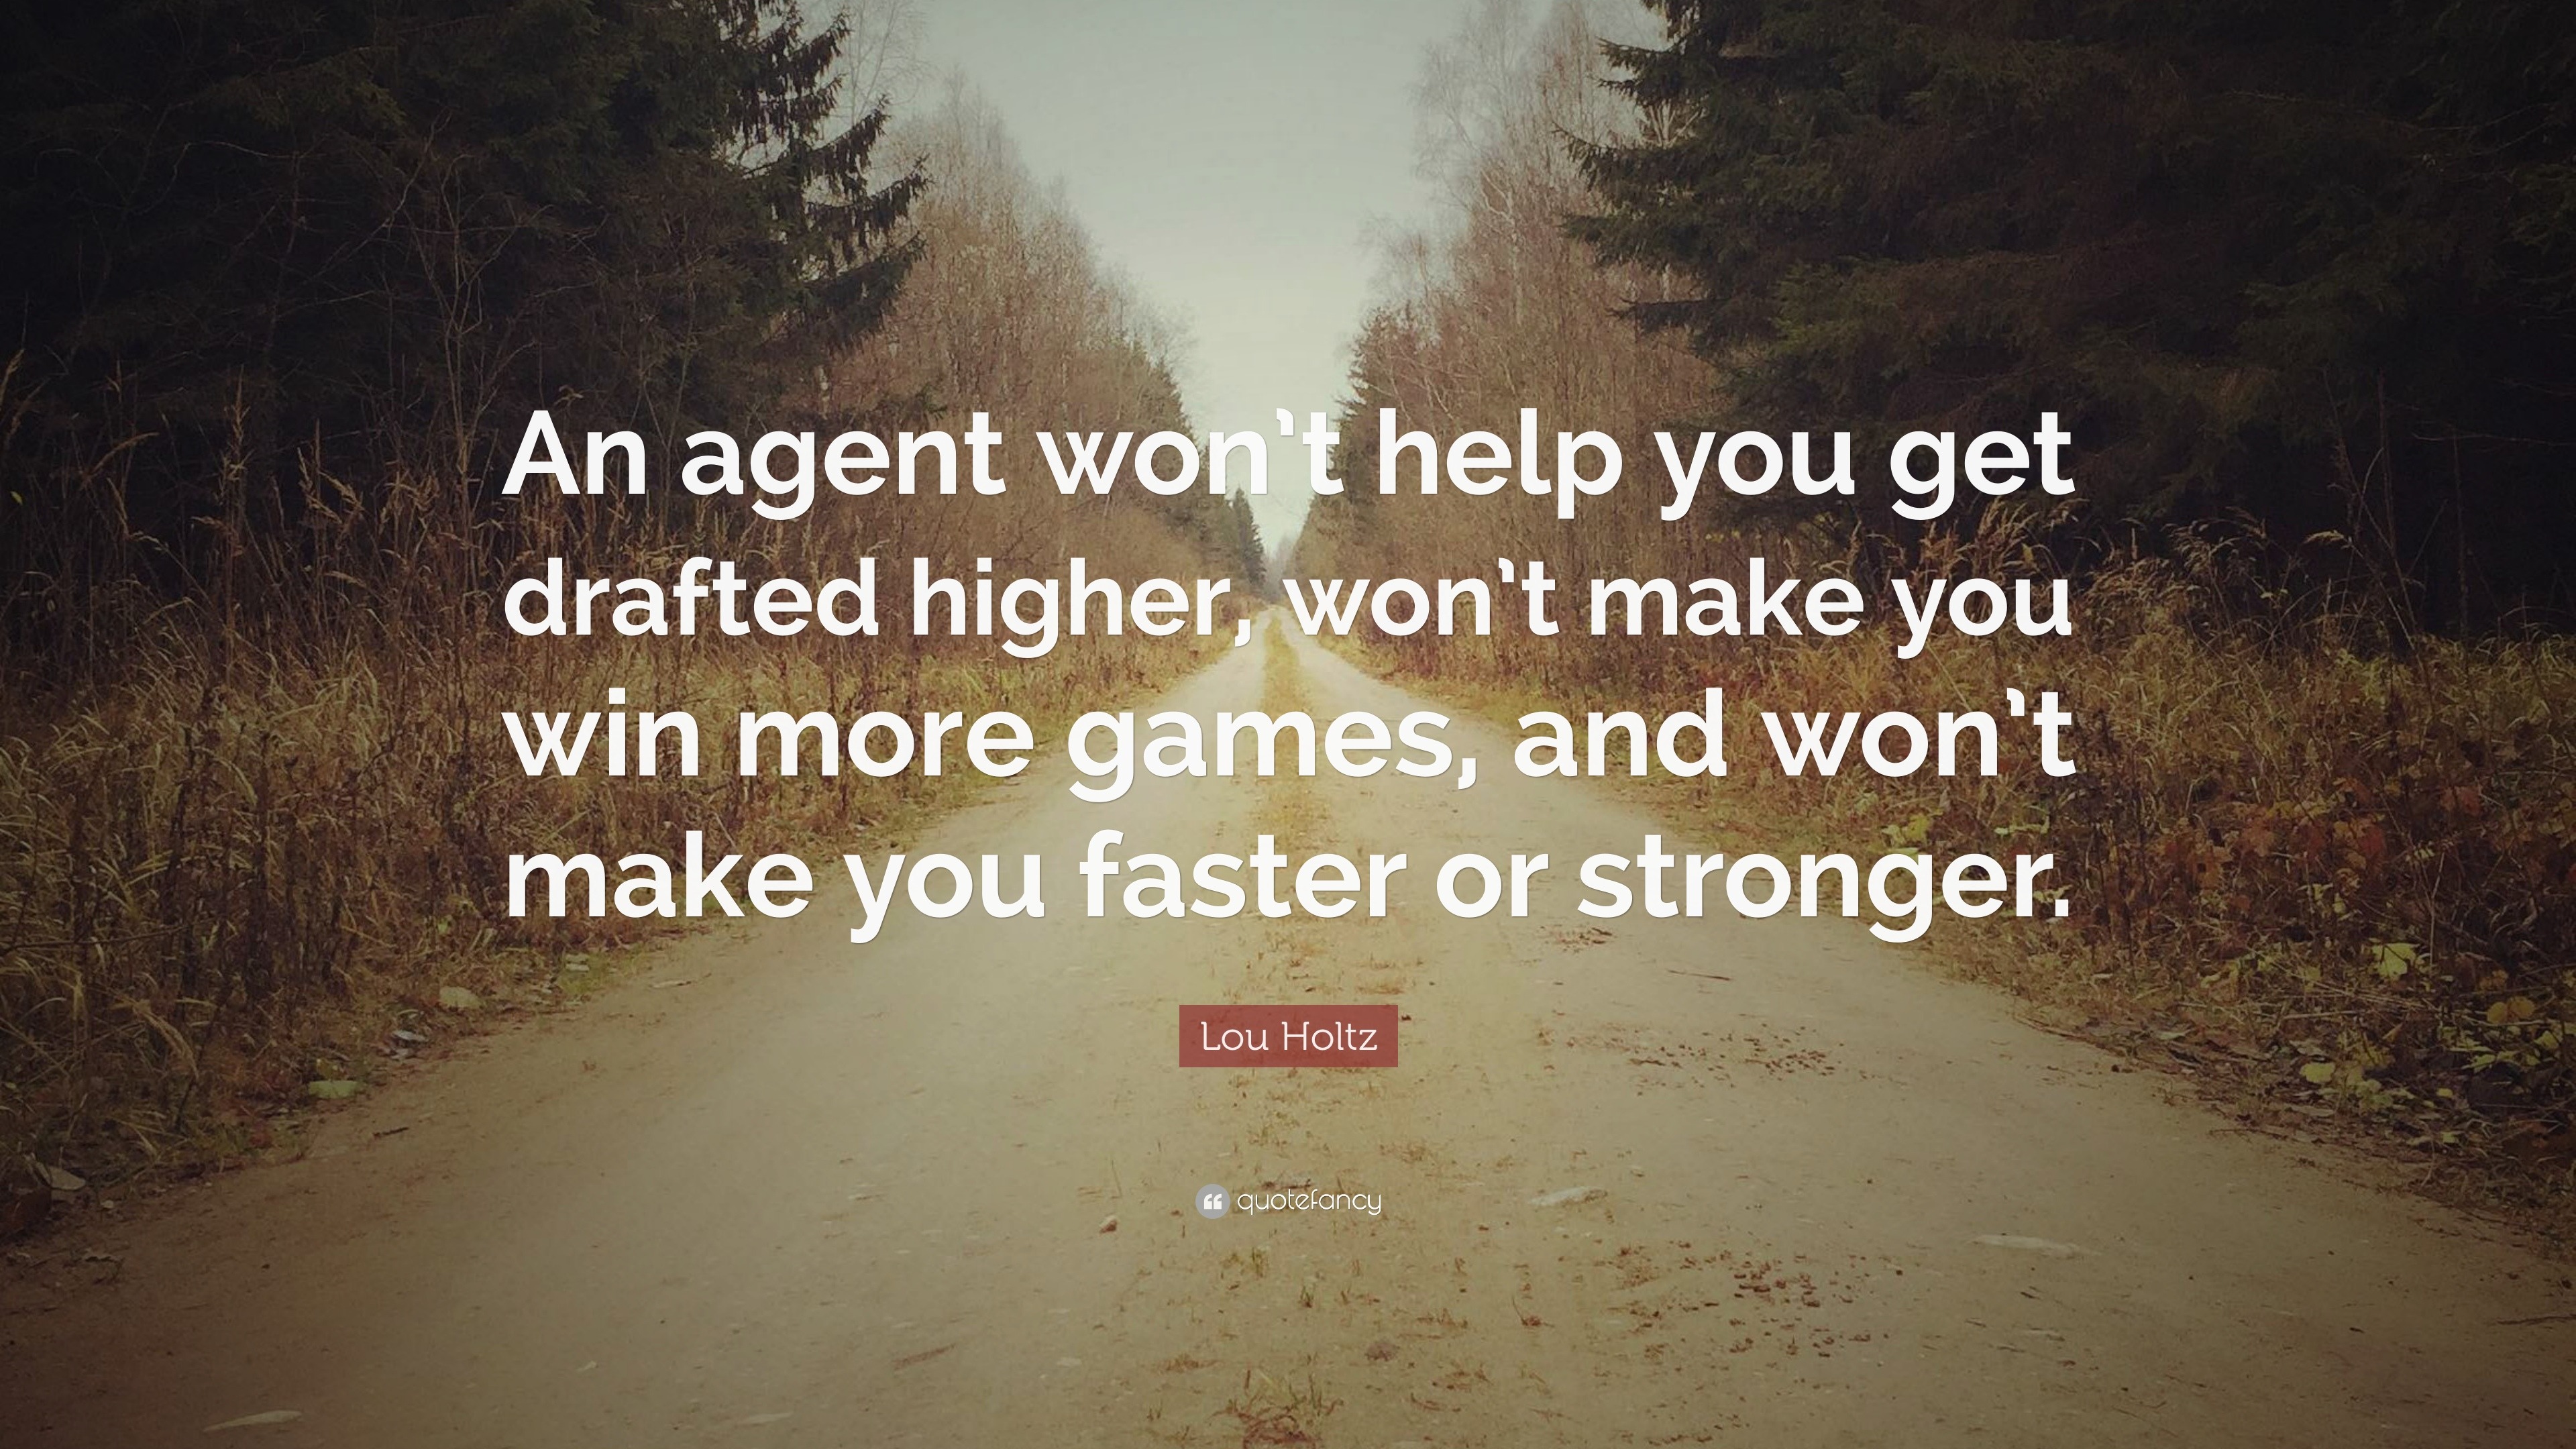 Lou Holtz Quote: “An agent won’t help you get drafted higher, won’t ...